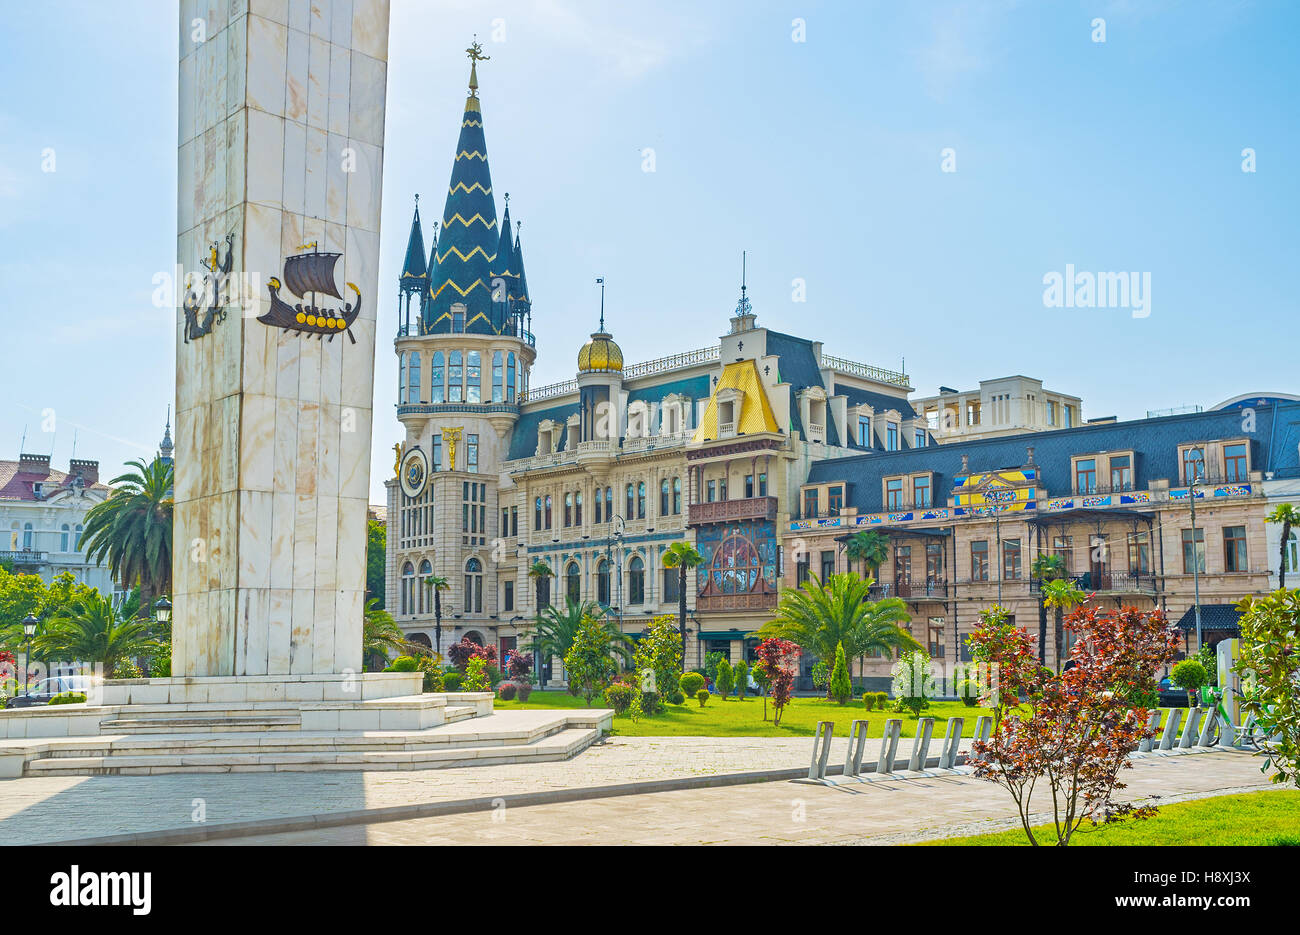 The white stone column of Medea monument, decorated with Argo ship with the astronomical tower on the background, Batumi, Georgia. Stock Photo